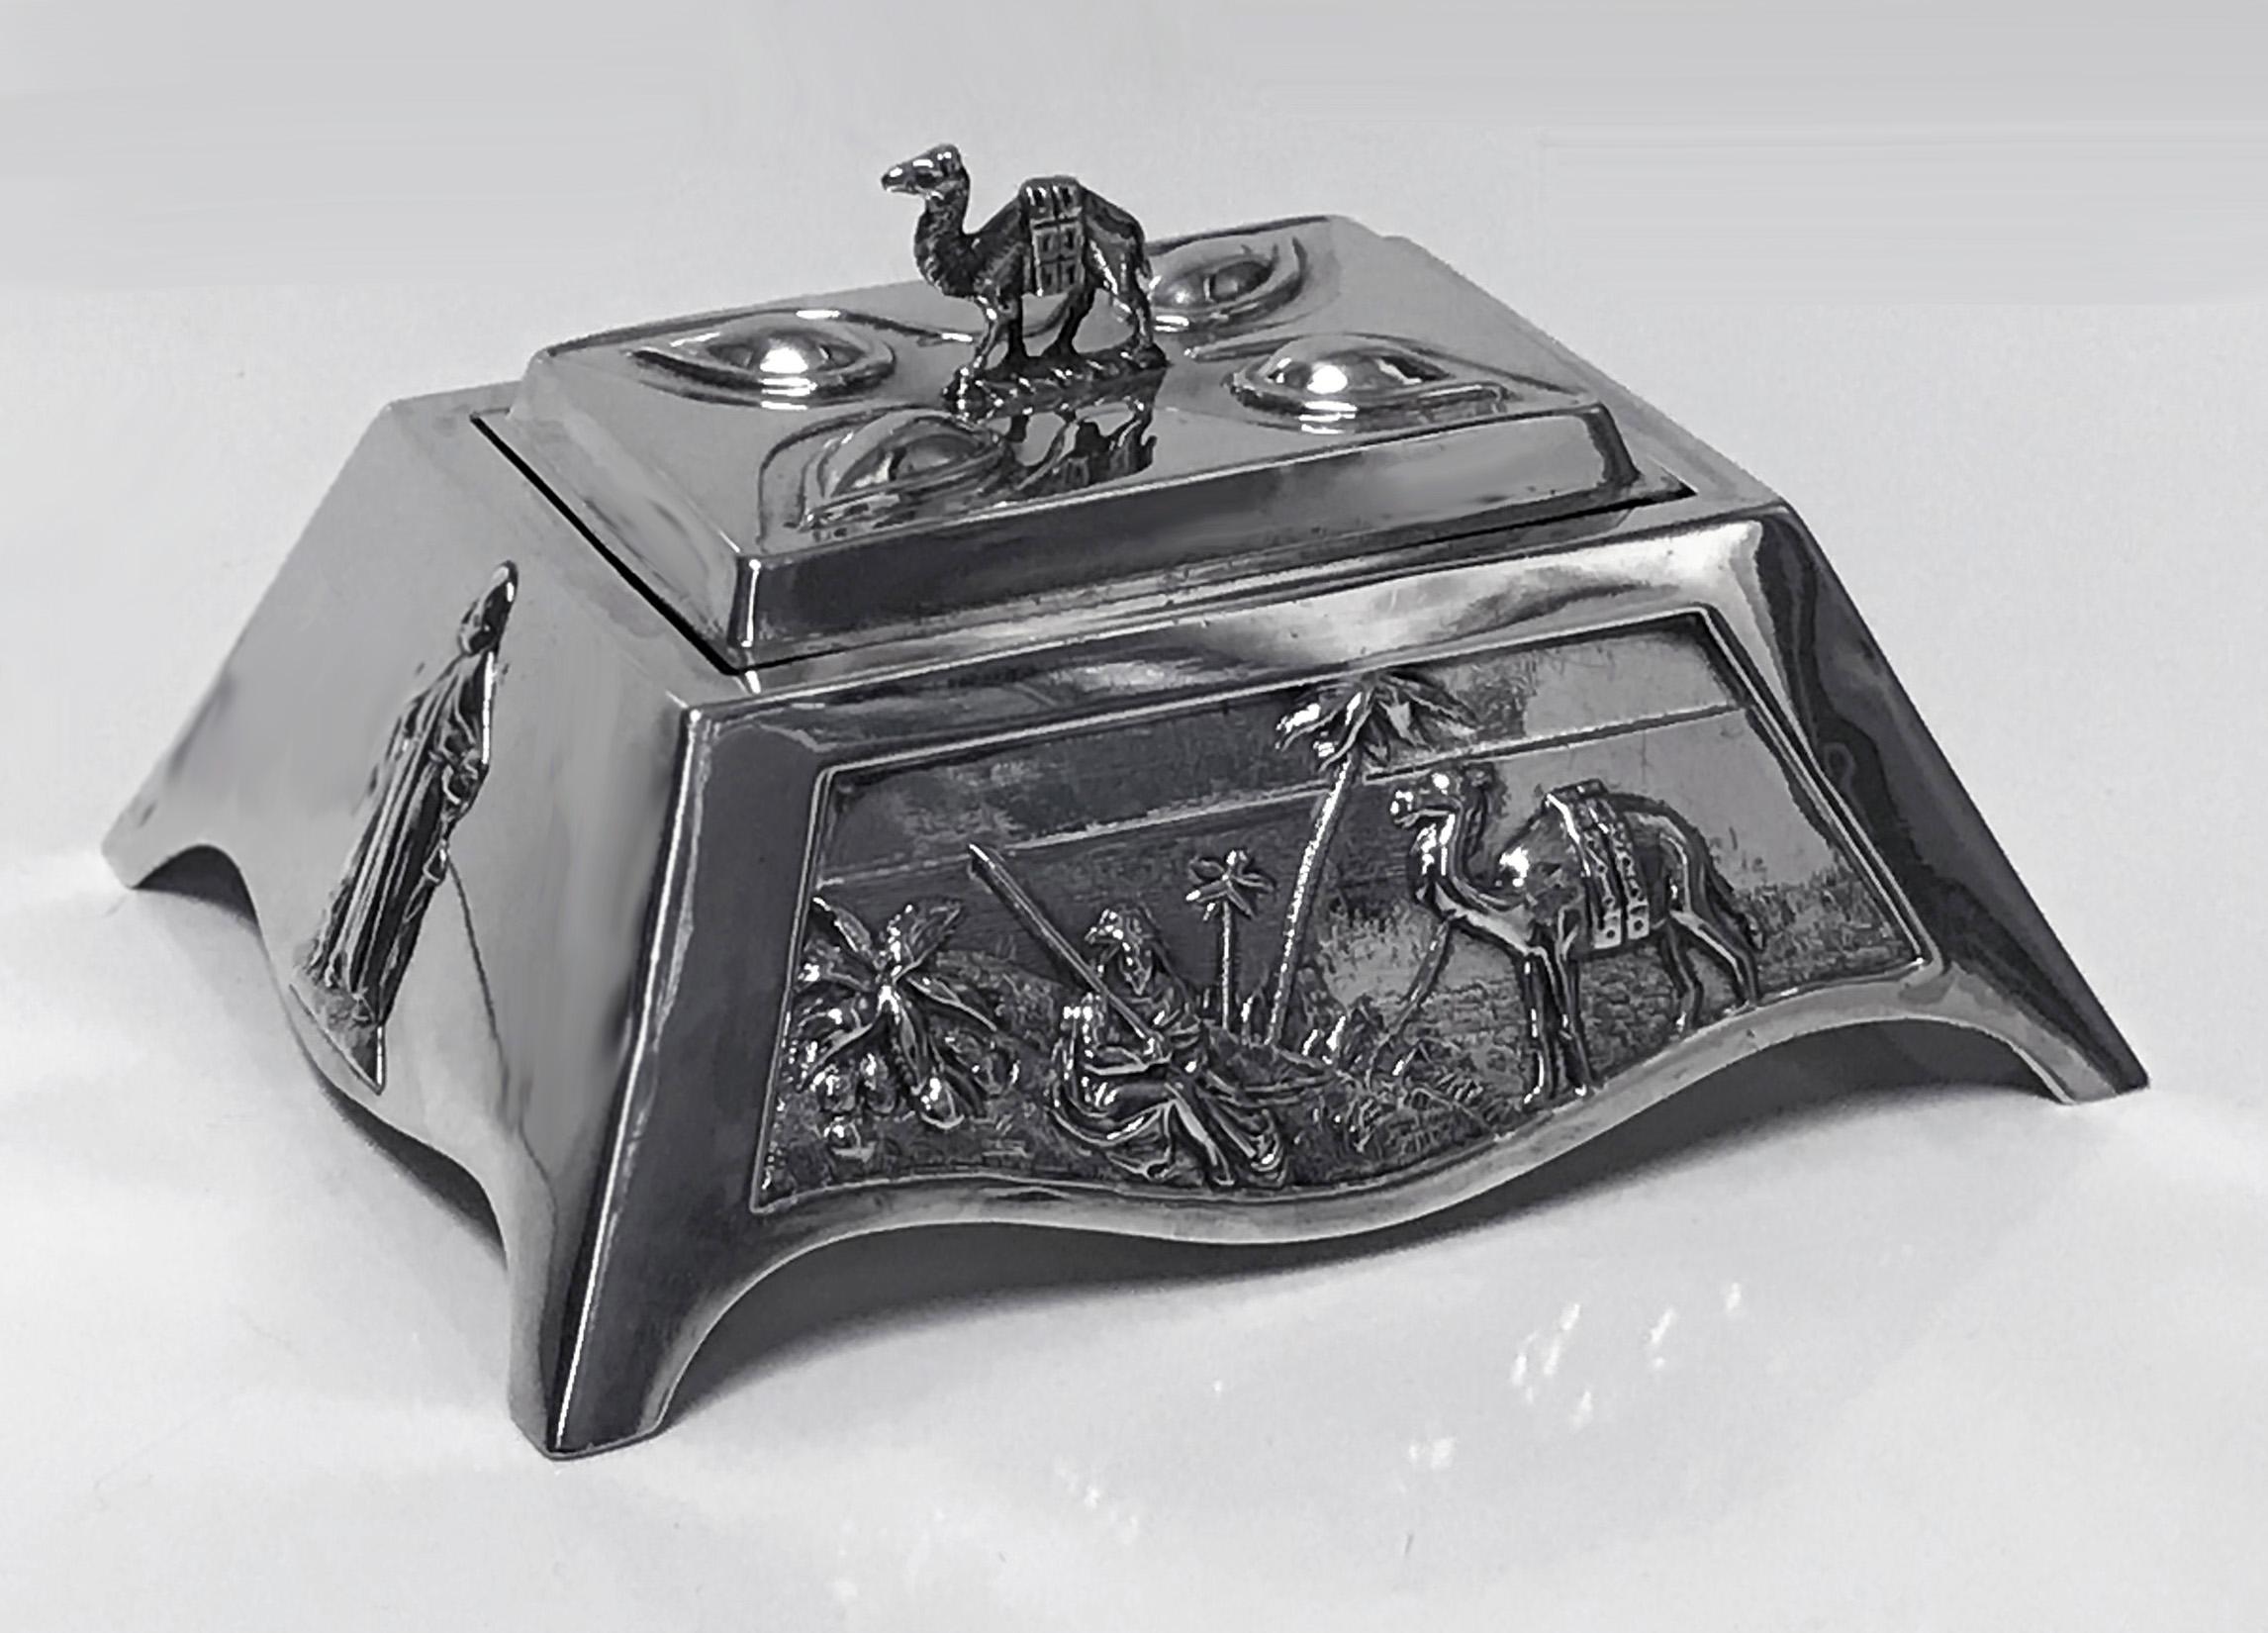 Edward VII 1901 Coronation Silver Box decorated with Arabian scenes with camels, robed figure and Edward V11 Coronet above crossed swords. Hallmarked for Mappin & Webb, London 1901. Measures: 5.00 x 4.25 x 2.50 inches. Weight: 165.43 grams